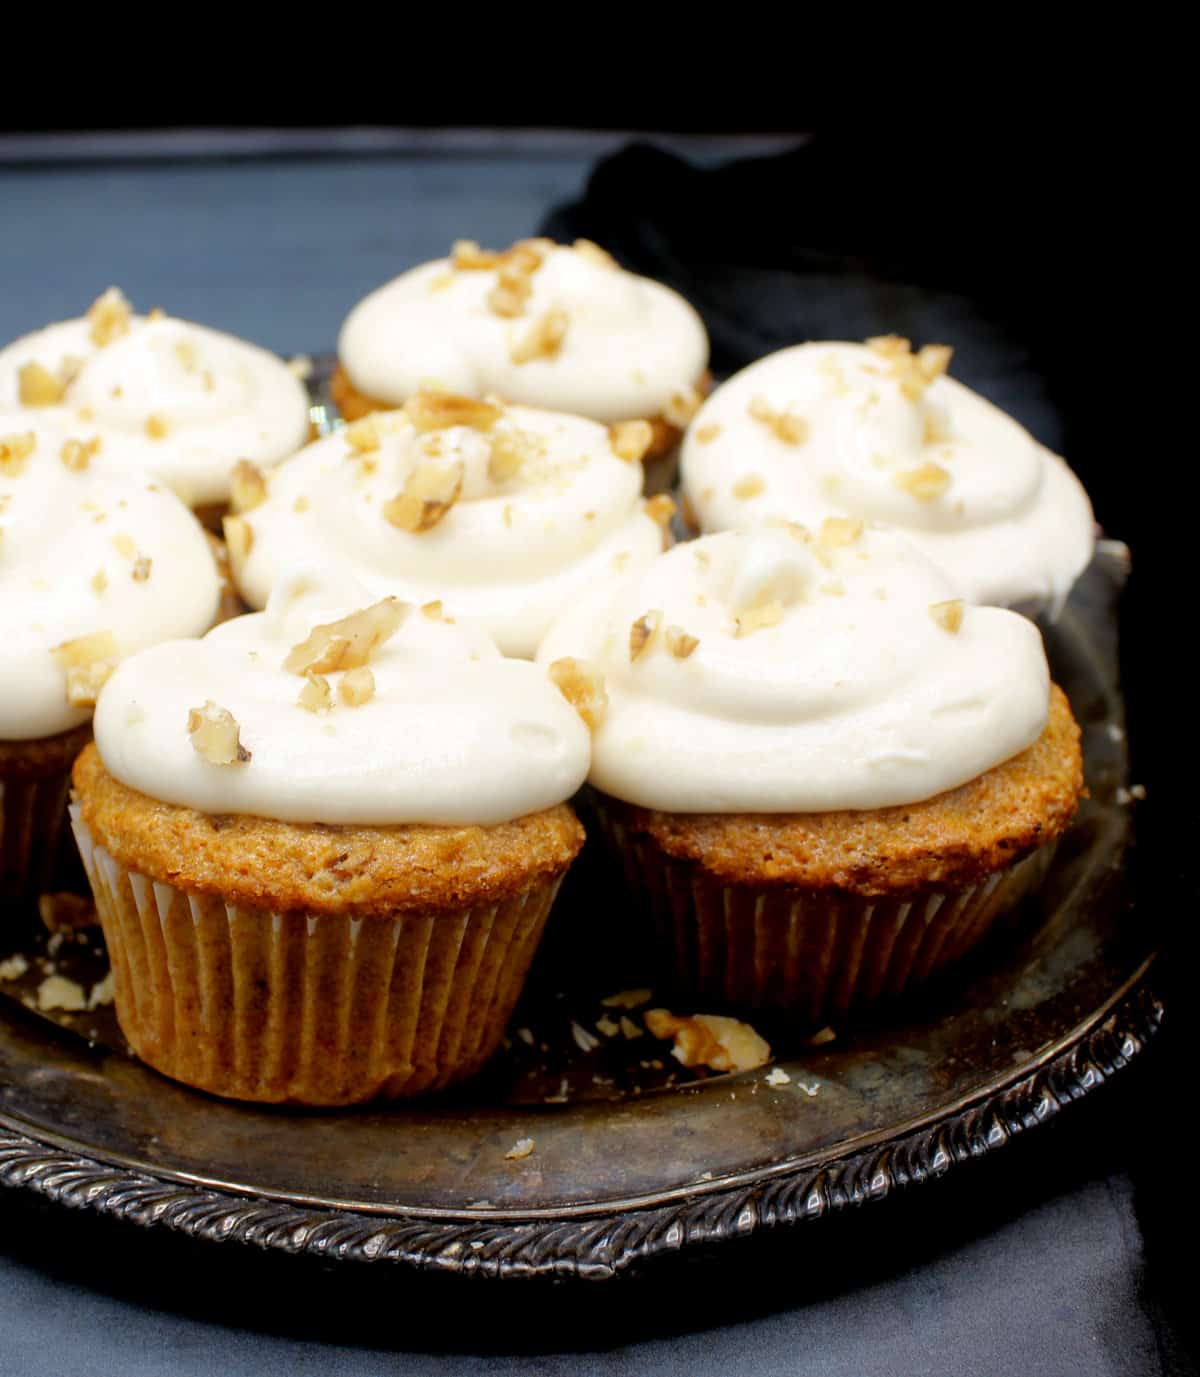 Close front shot of vegan carrot cupcakes with cream cheese frosting and walnuts scattered on top in a silver plate.